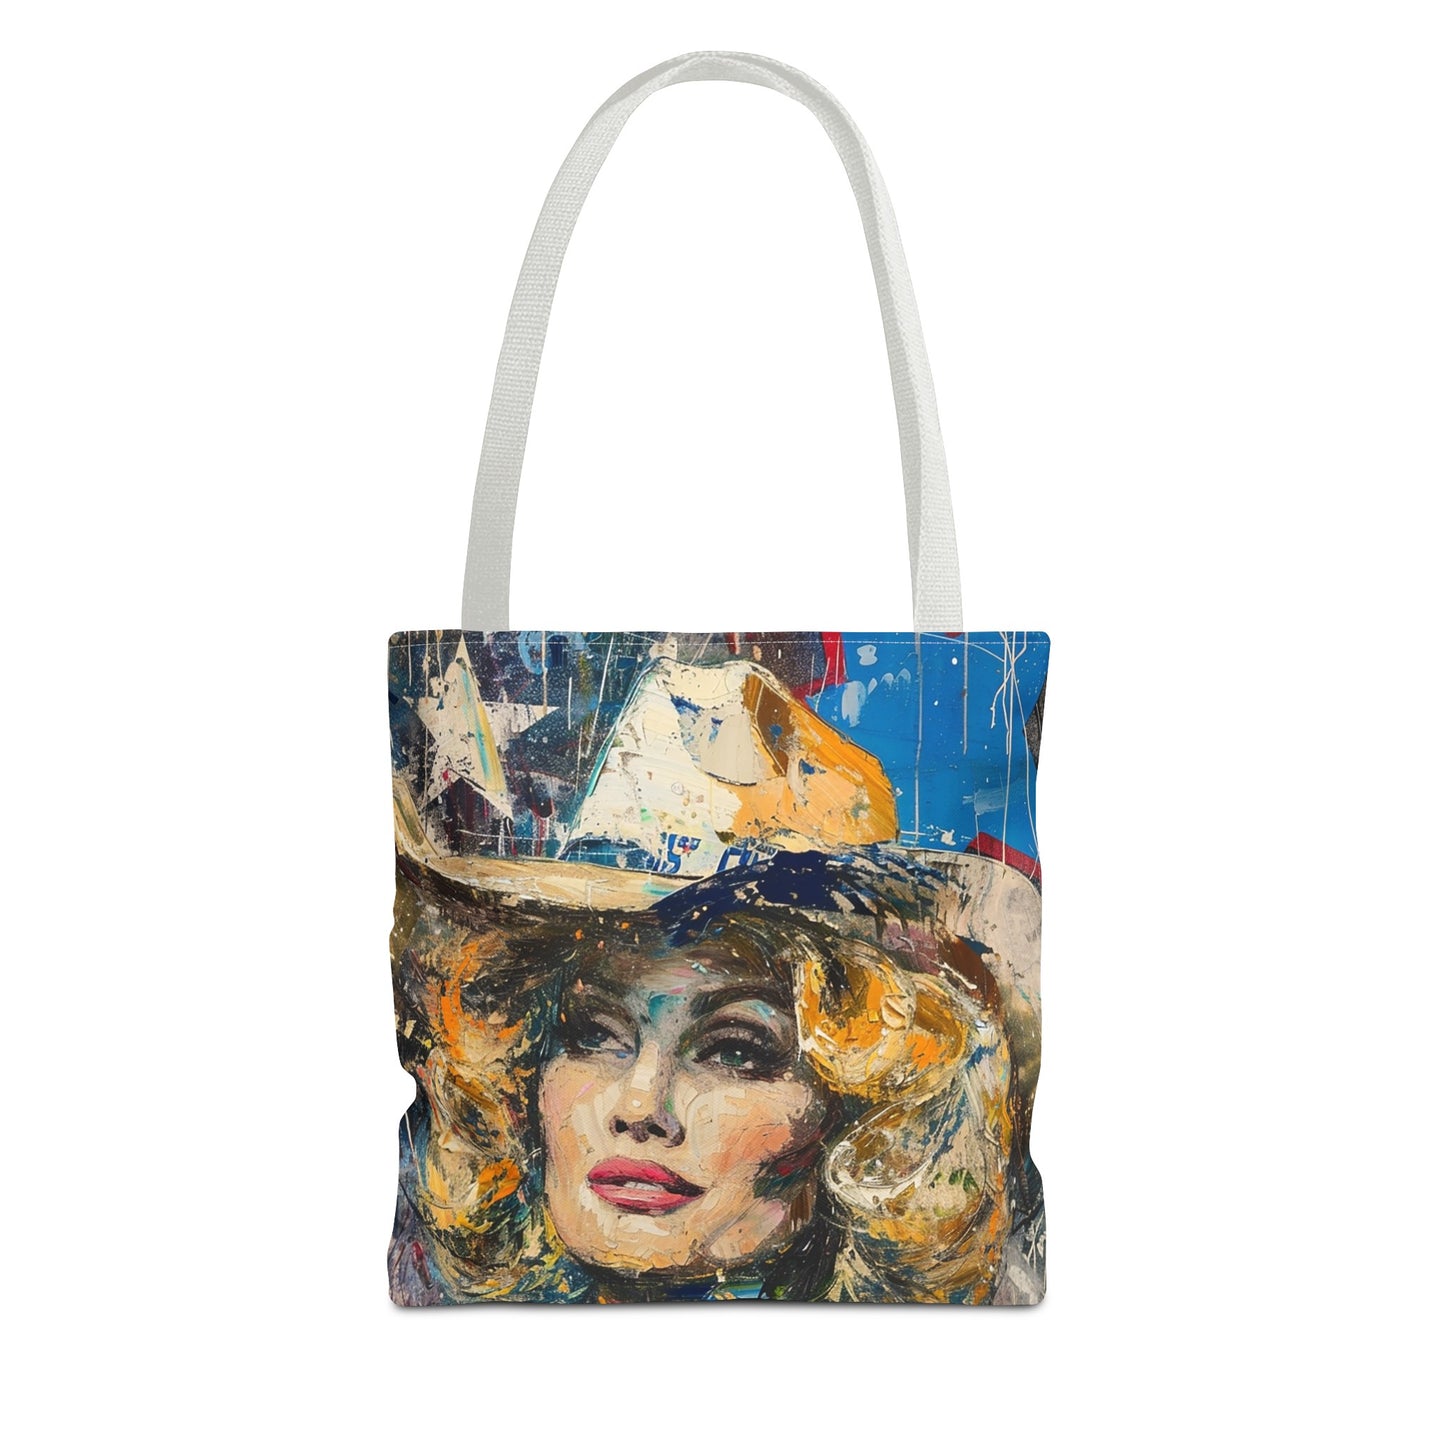 Tote Bag - Country Queen white handle